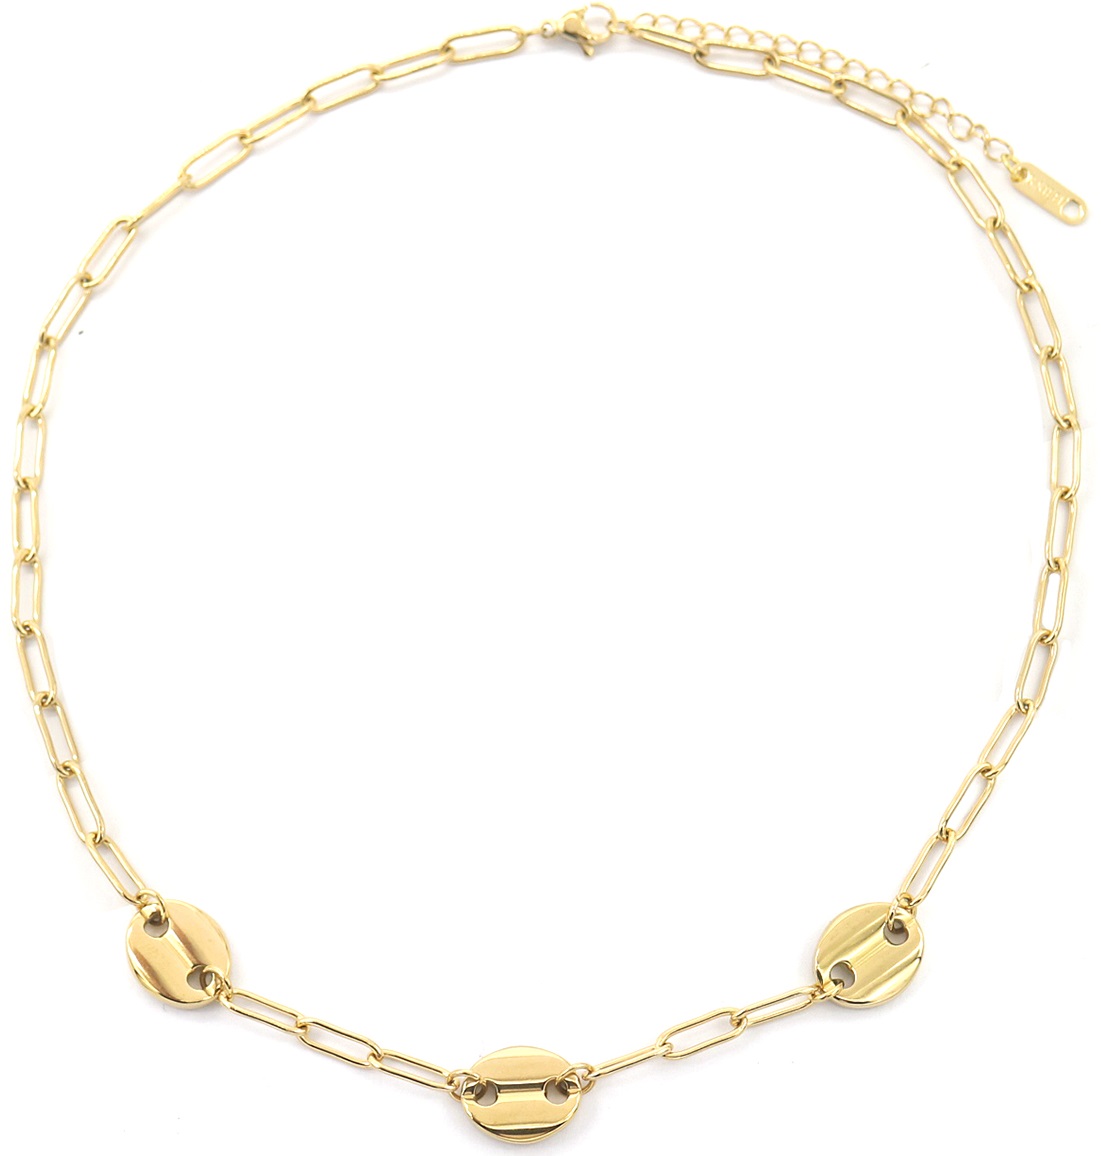 F-A19.1 N2033-022G S. Steel Chain Necklace Gold